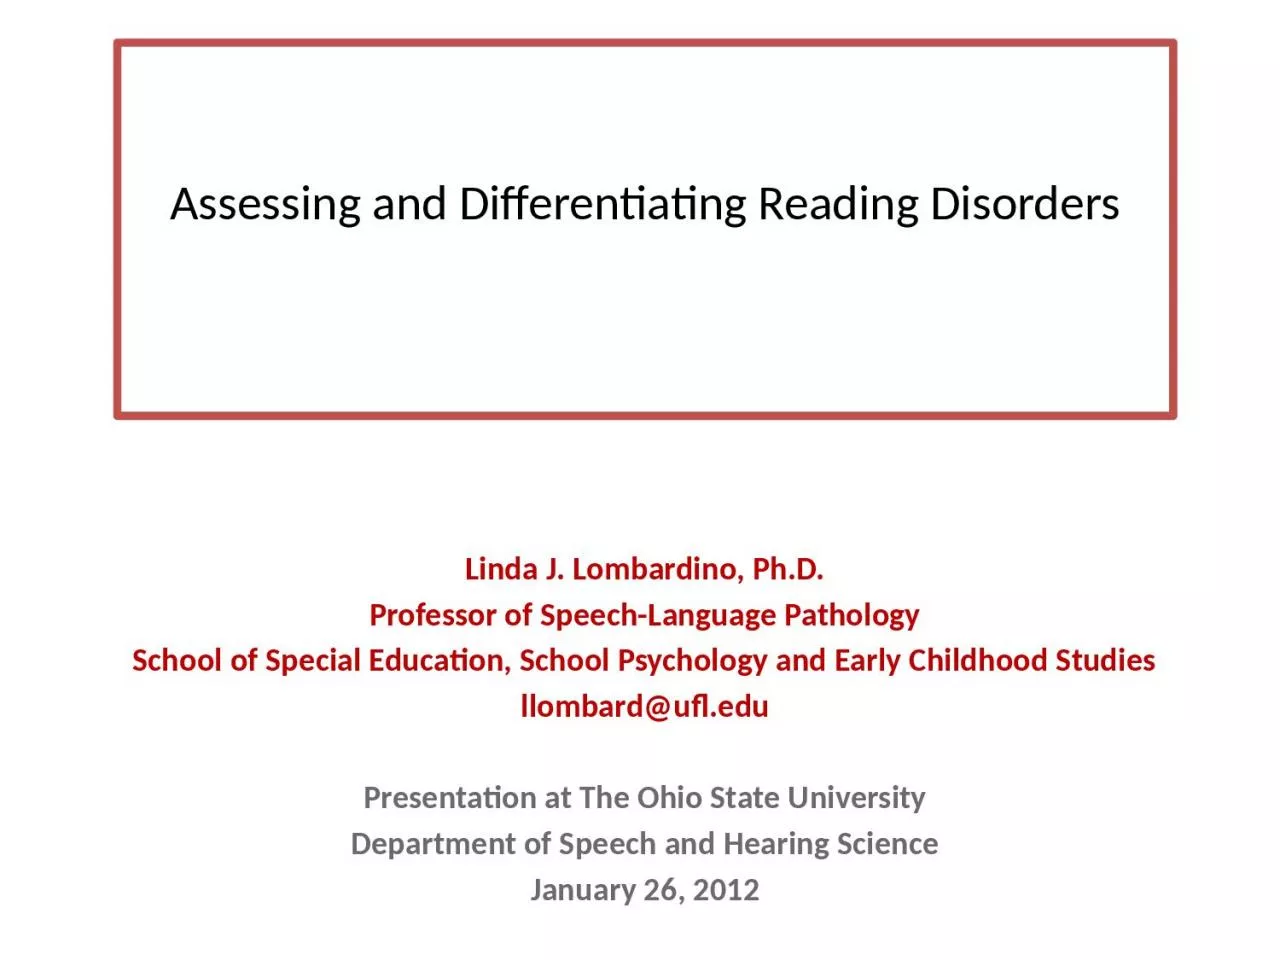 Assessing and Differentiating Reading Disorders